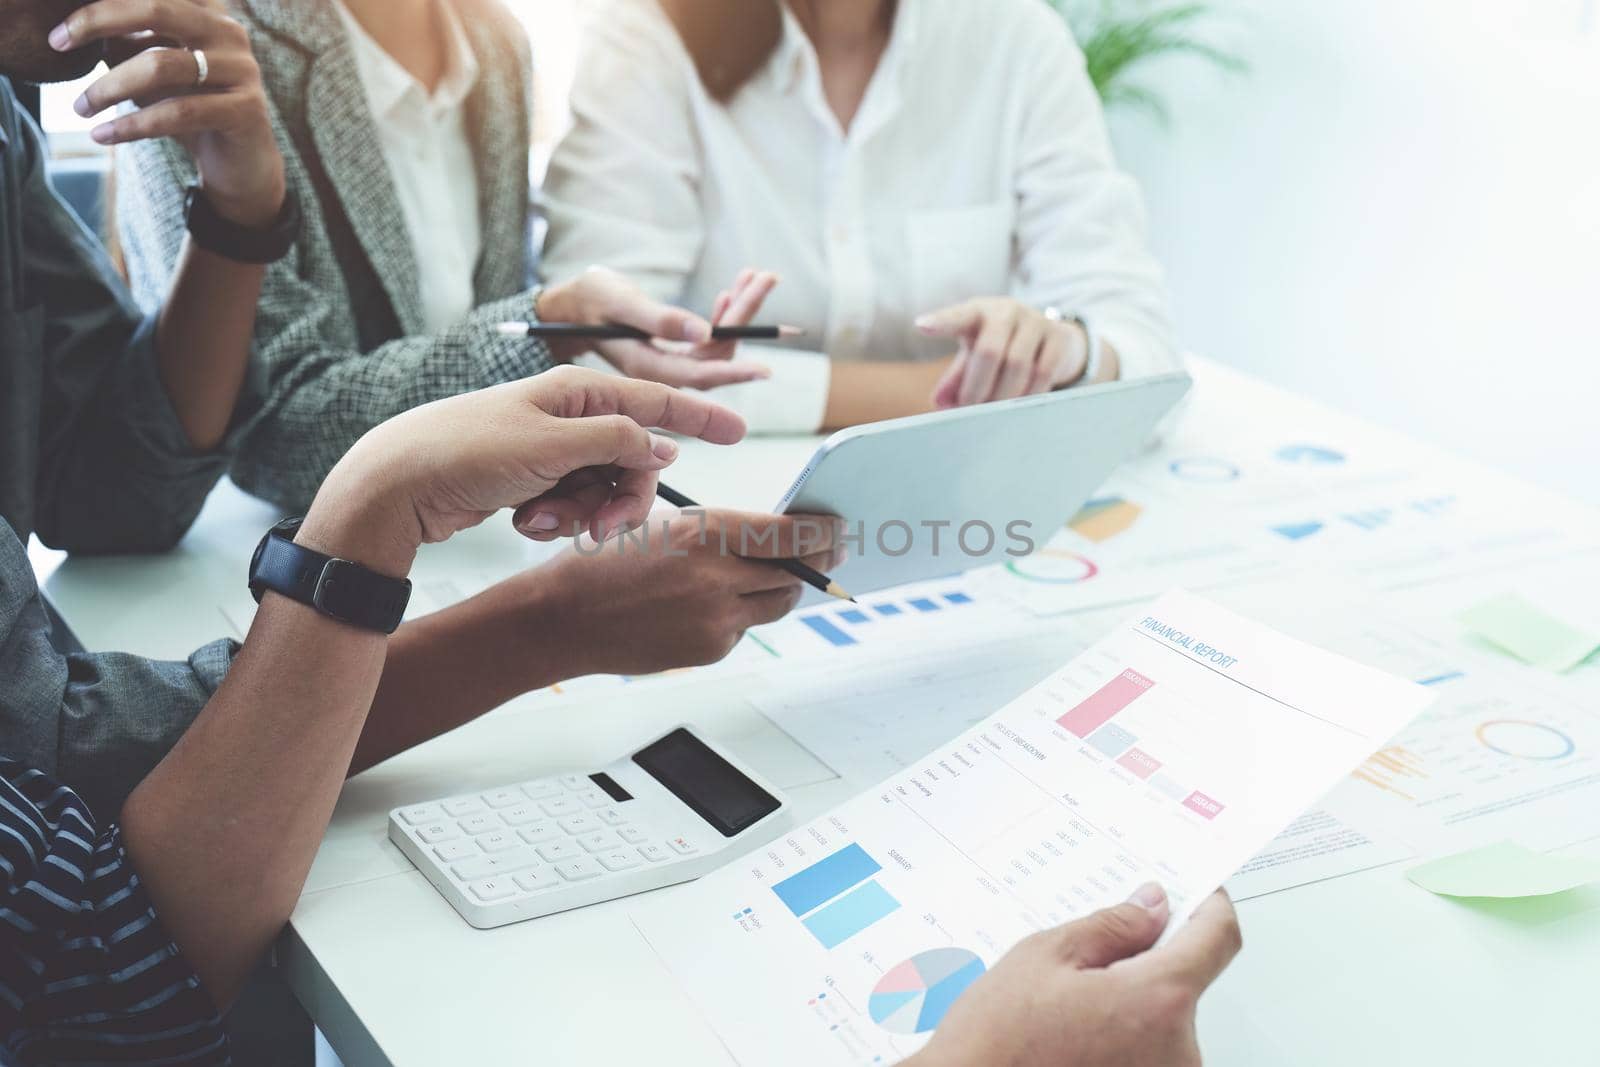 Planning to reduce investment risks, the image of a group of businesspeople working with partners is adjusting marketing strategies to analyze profitable and targeted customer needs at meetings by Manastrong